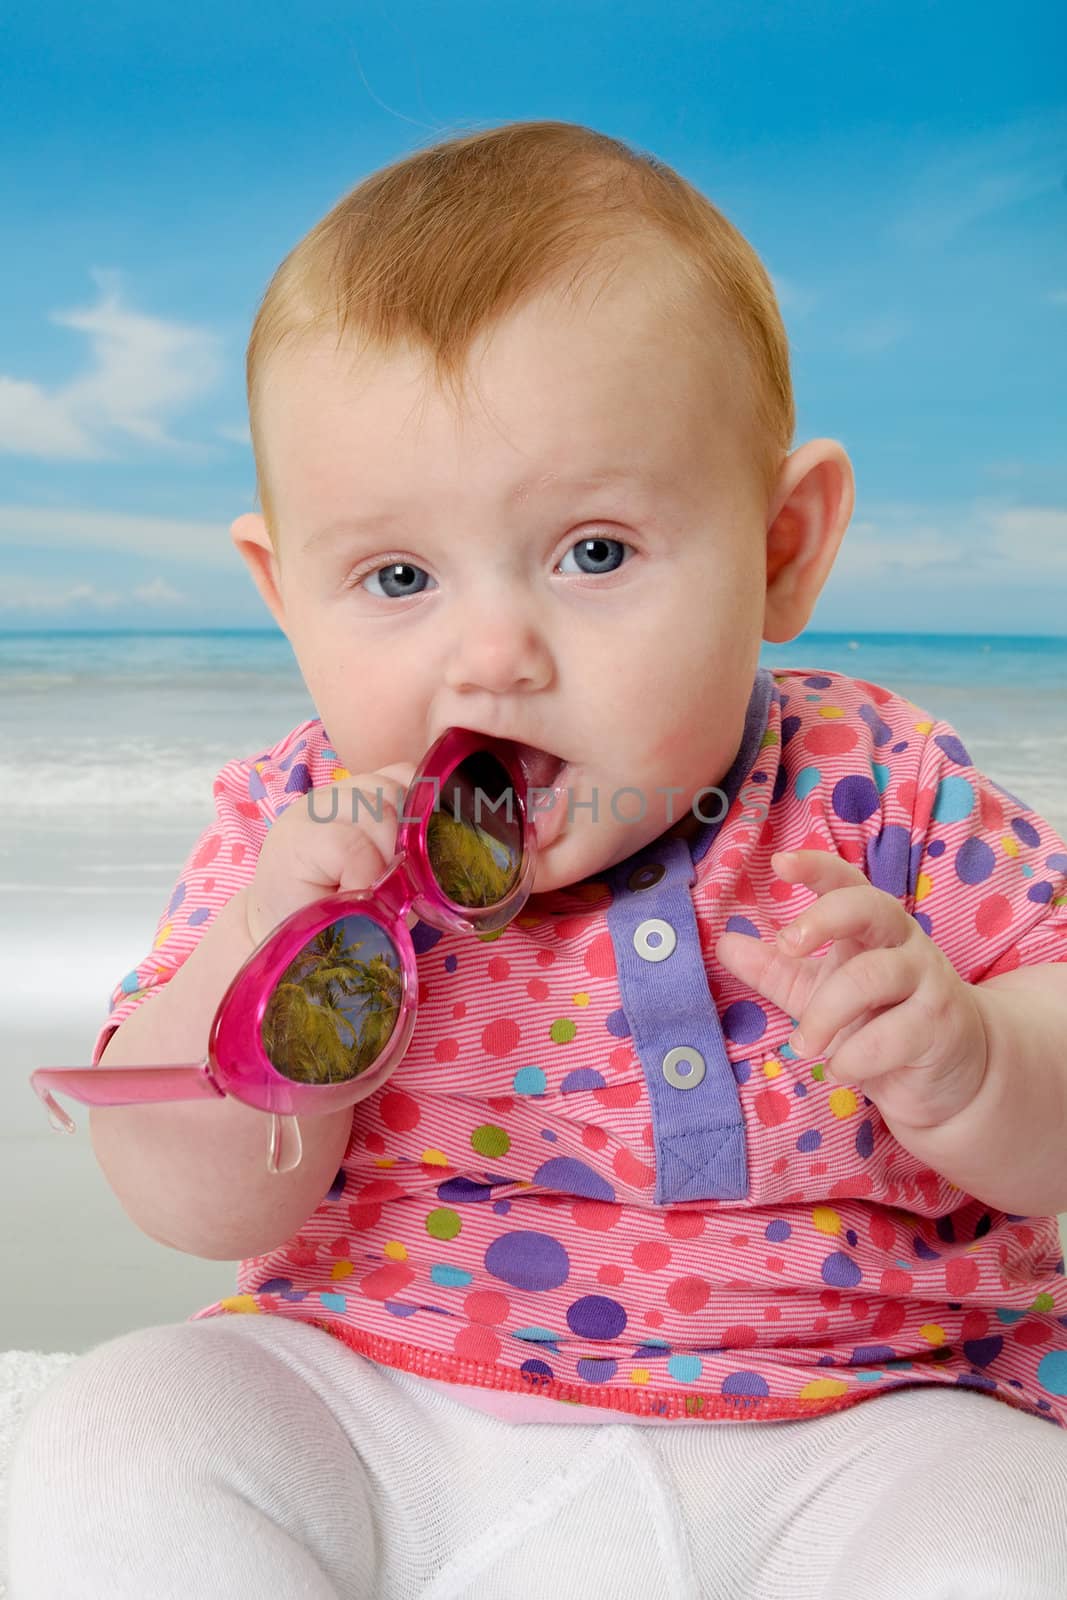 Sweet baby on vacation on beach with the sea in the background.